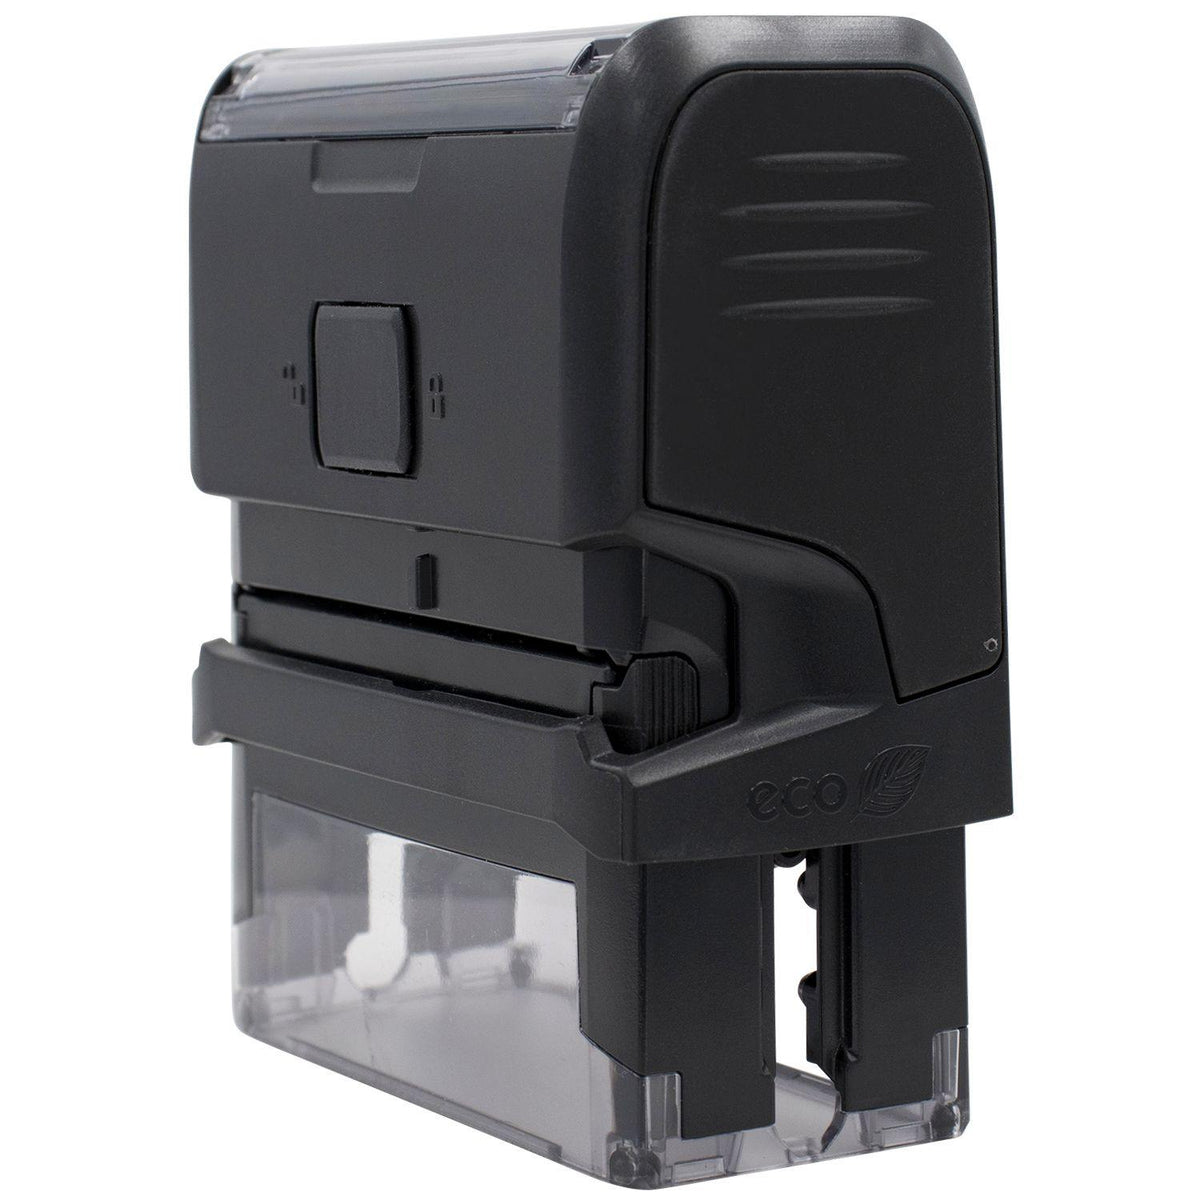 Self-Inking Great Job Stamp - Engineer Seal Stamps - Brand_Trodat, Impression Size_Small, Stamp Type_Self-Inking Stamp, Type of Use_Teacher